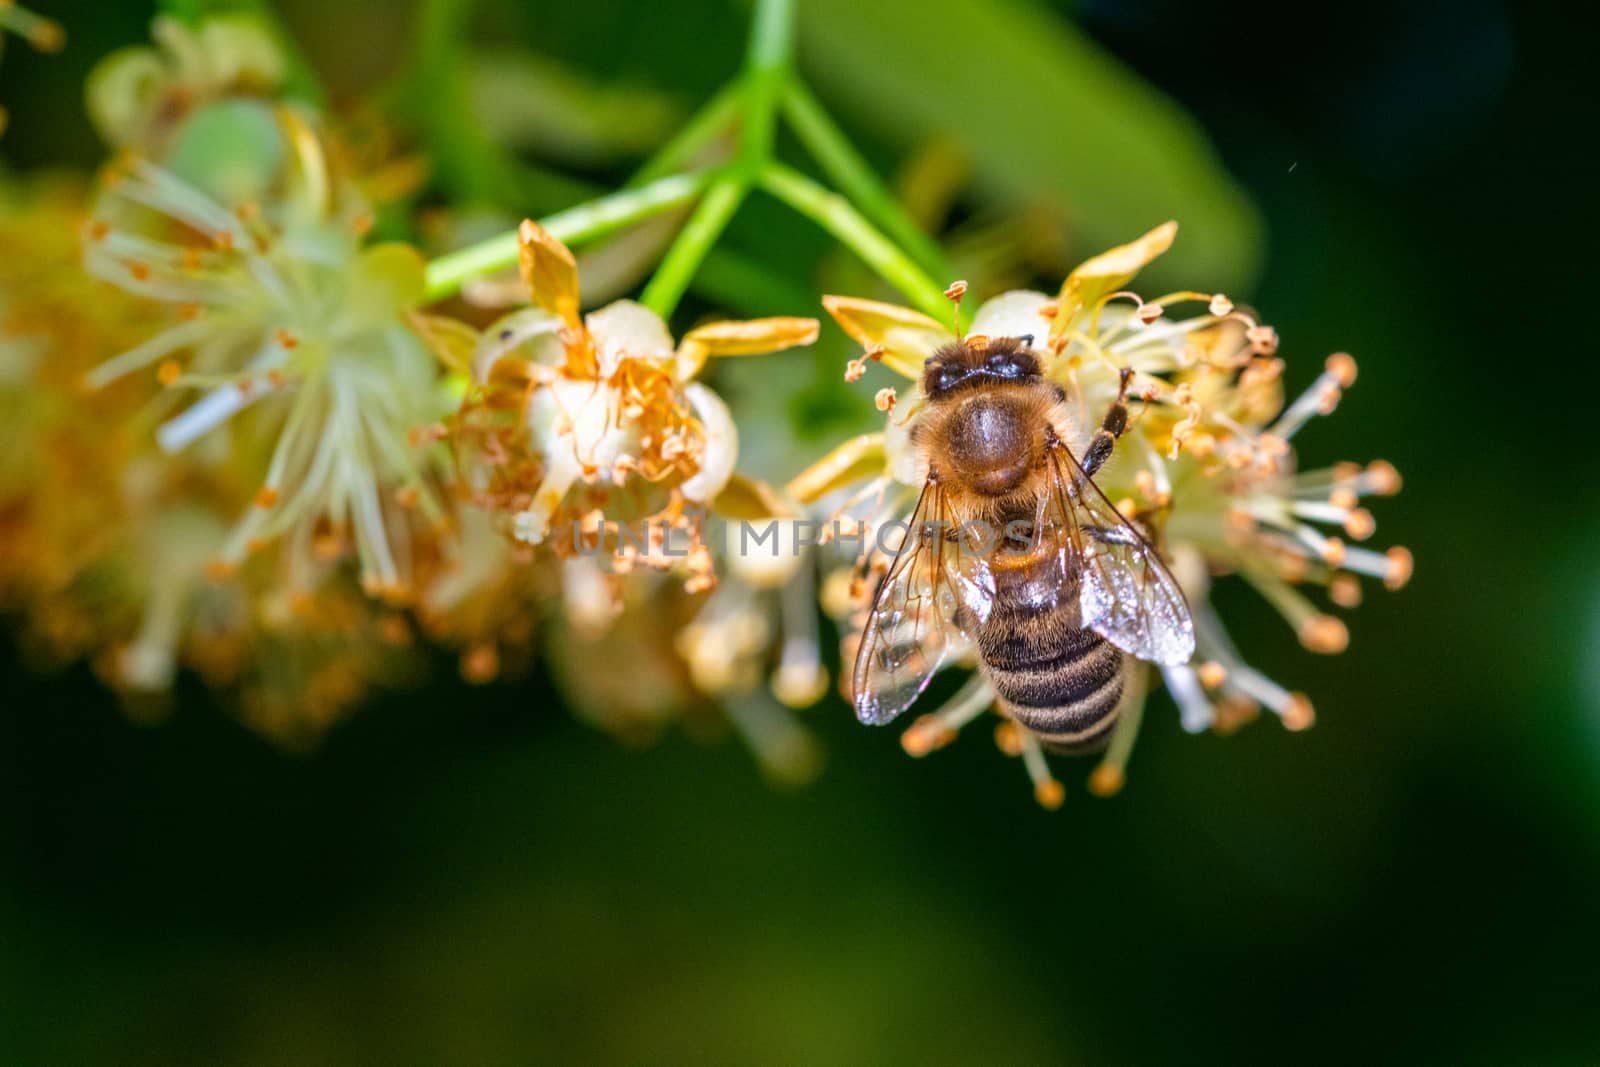 Honey bee in Linden Flowers, Apis Carnica in Linden Flowers, close up of Bumble bee collecting nectar, honey, bee pollinating